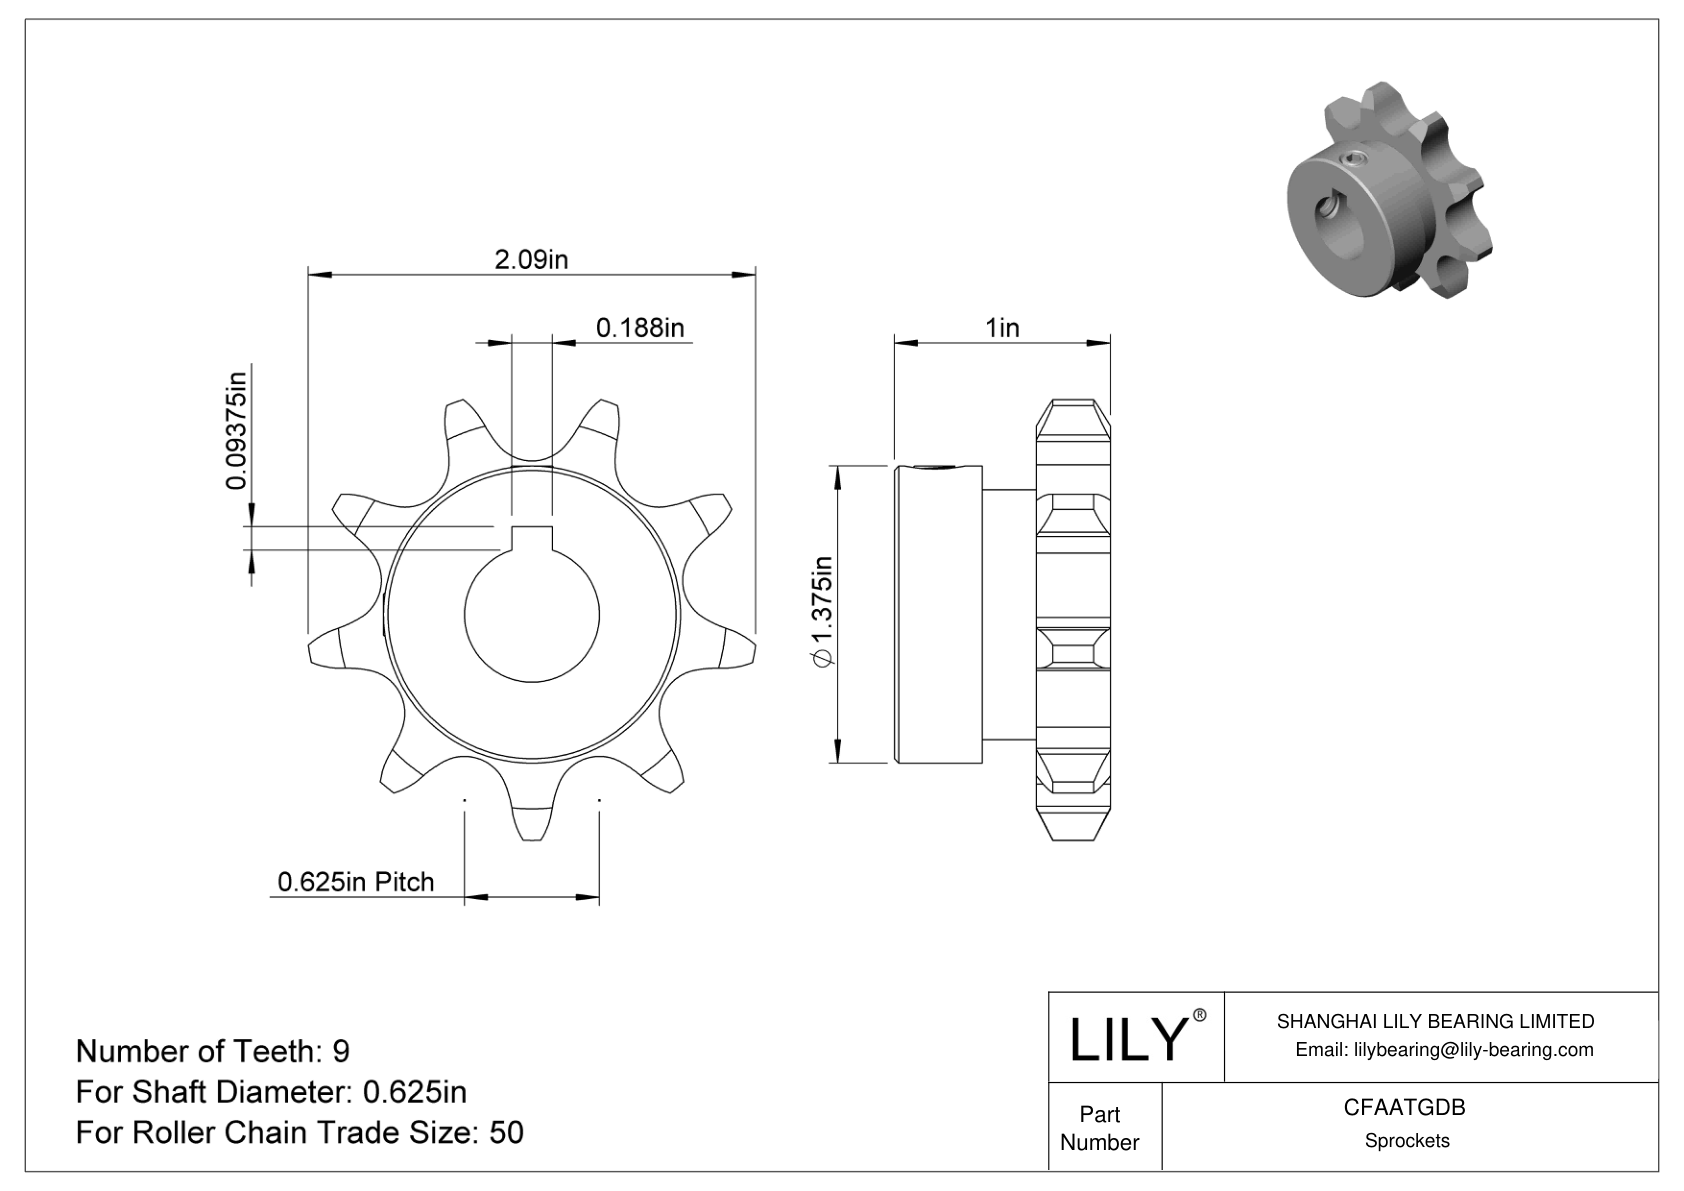 CFAATGDB Wear-Resistant Sprockets for ANSI Roller Chain cad drawing